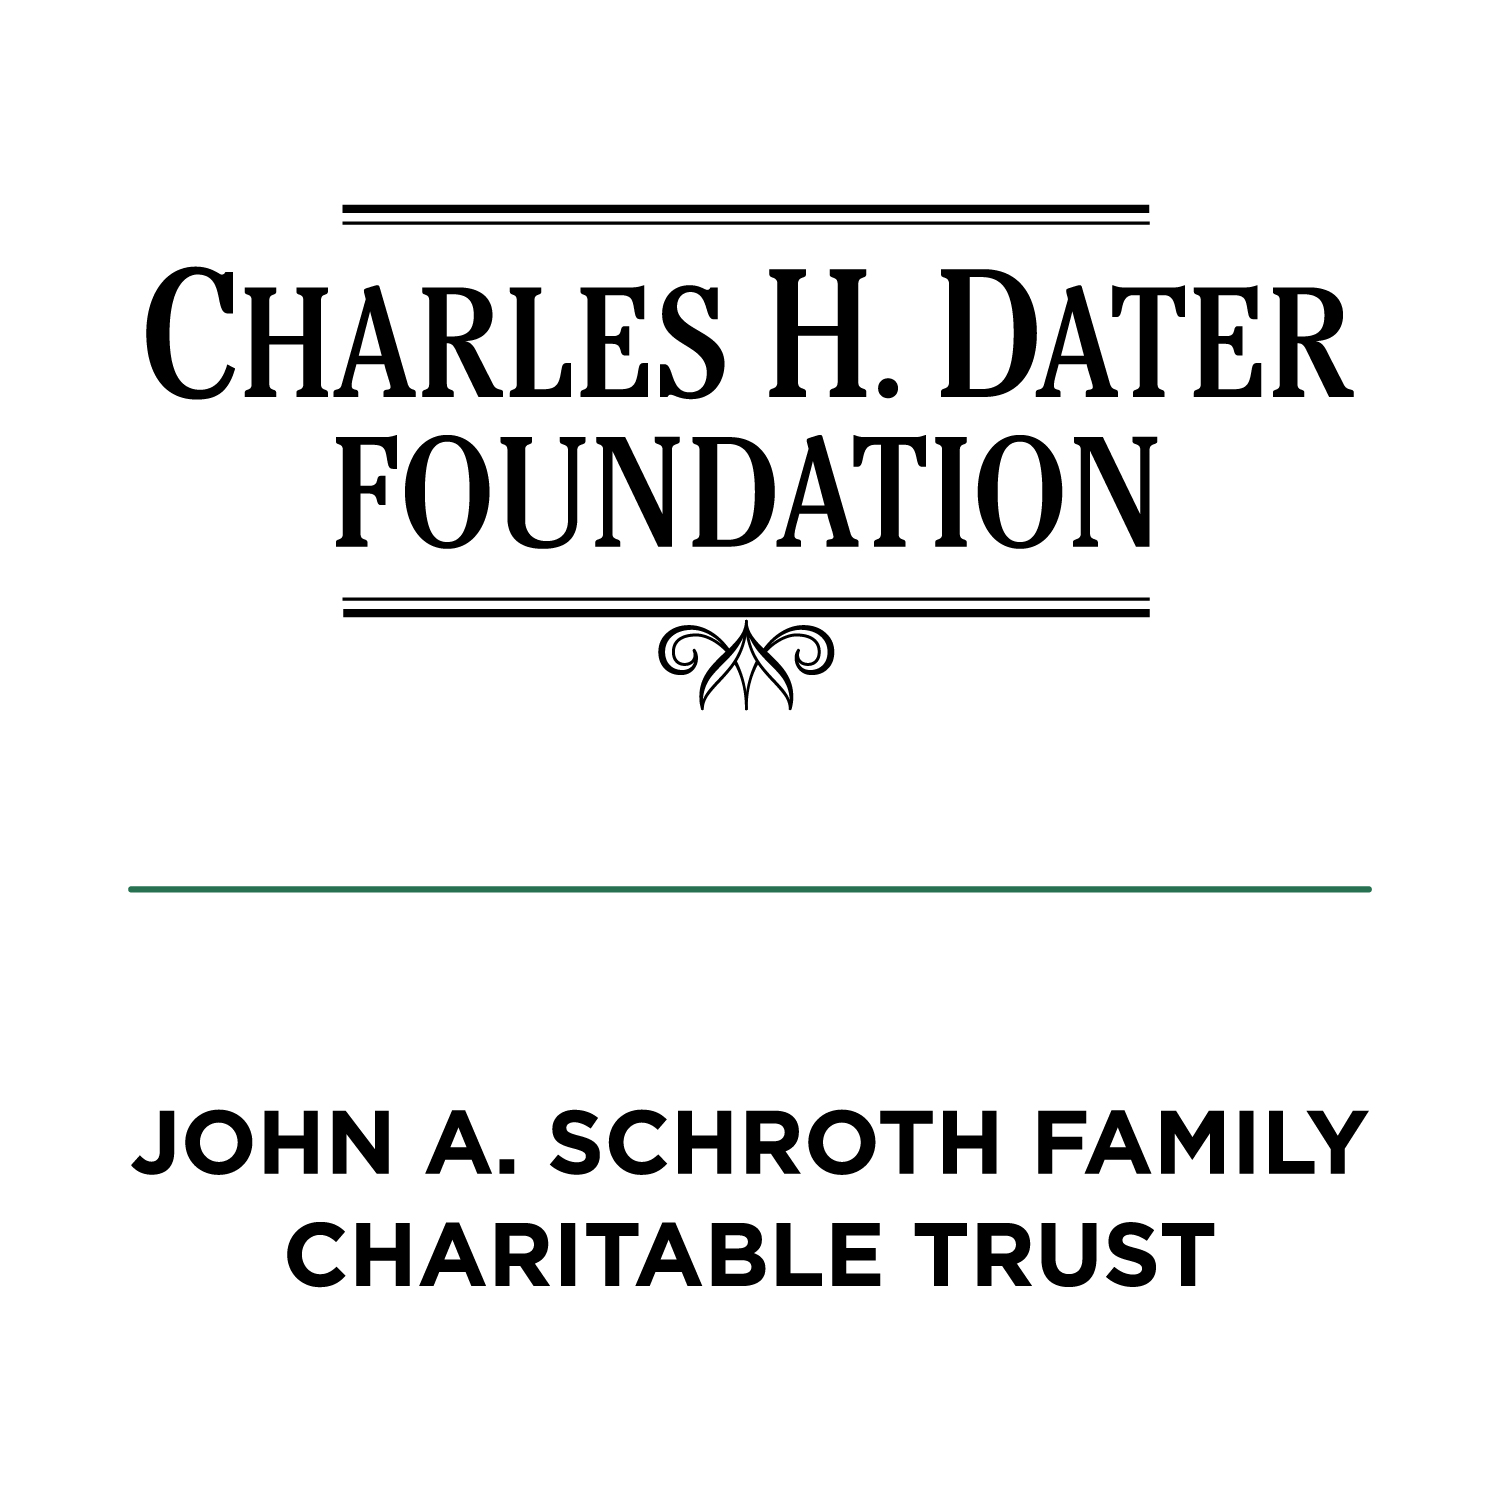 Image that says Charles H. Dater Foundation and John A. Schroth Family Charitable Trust